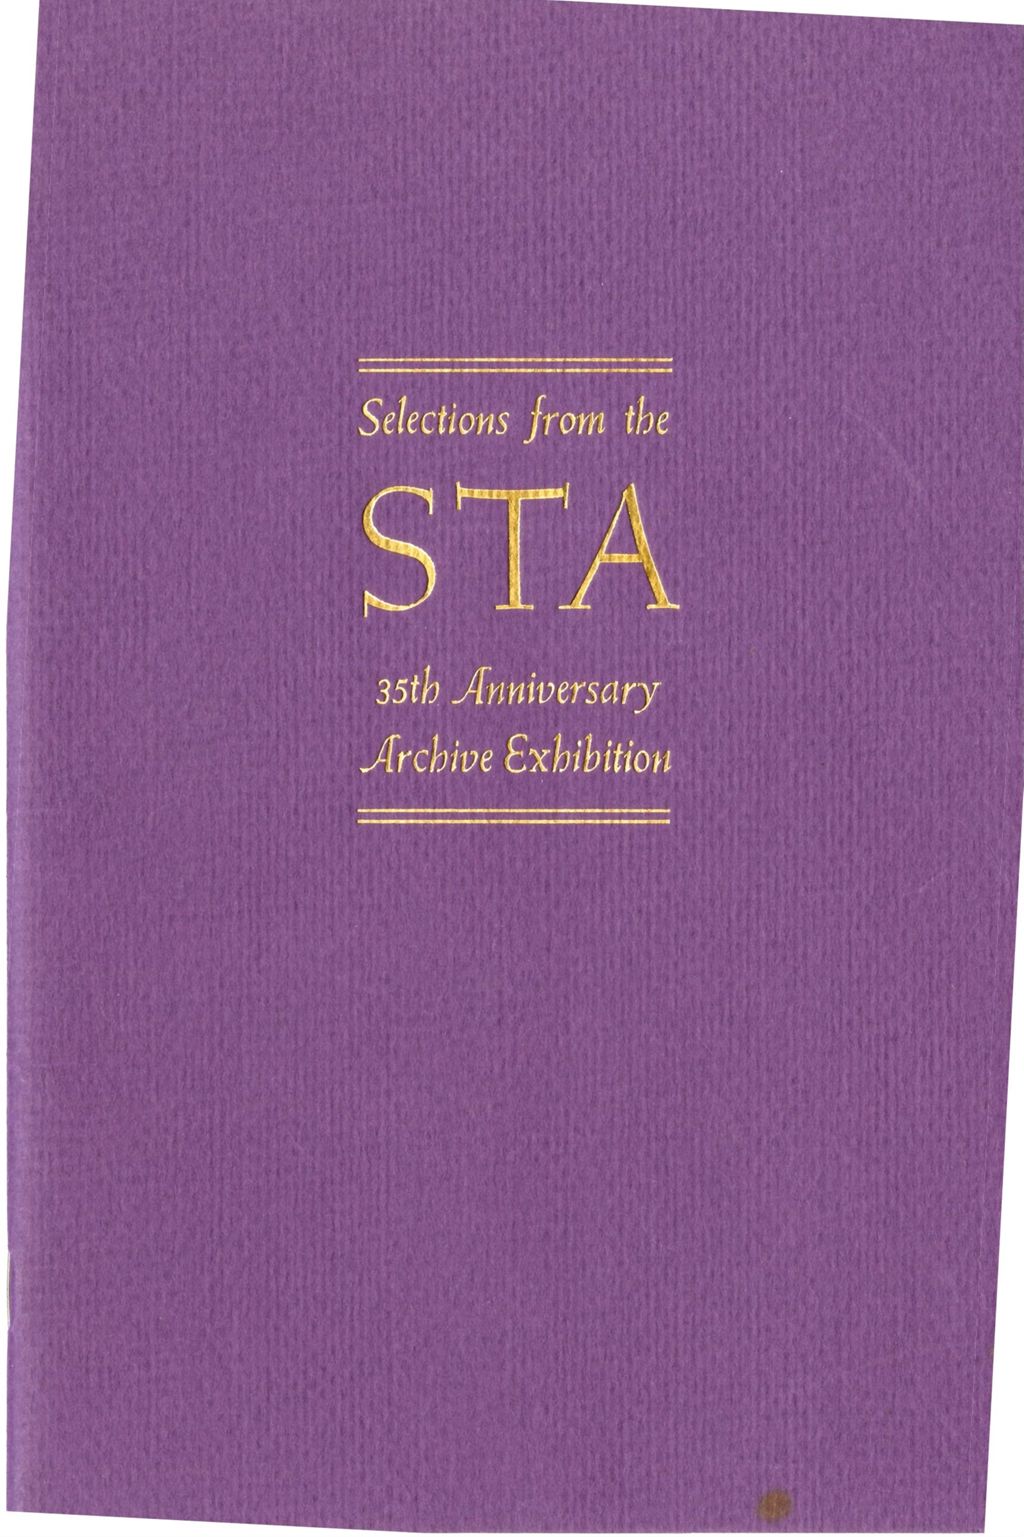 Selections from the STA 35th Anniversary Archive Exhibition